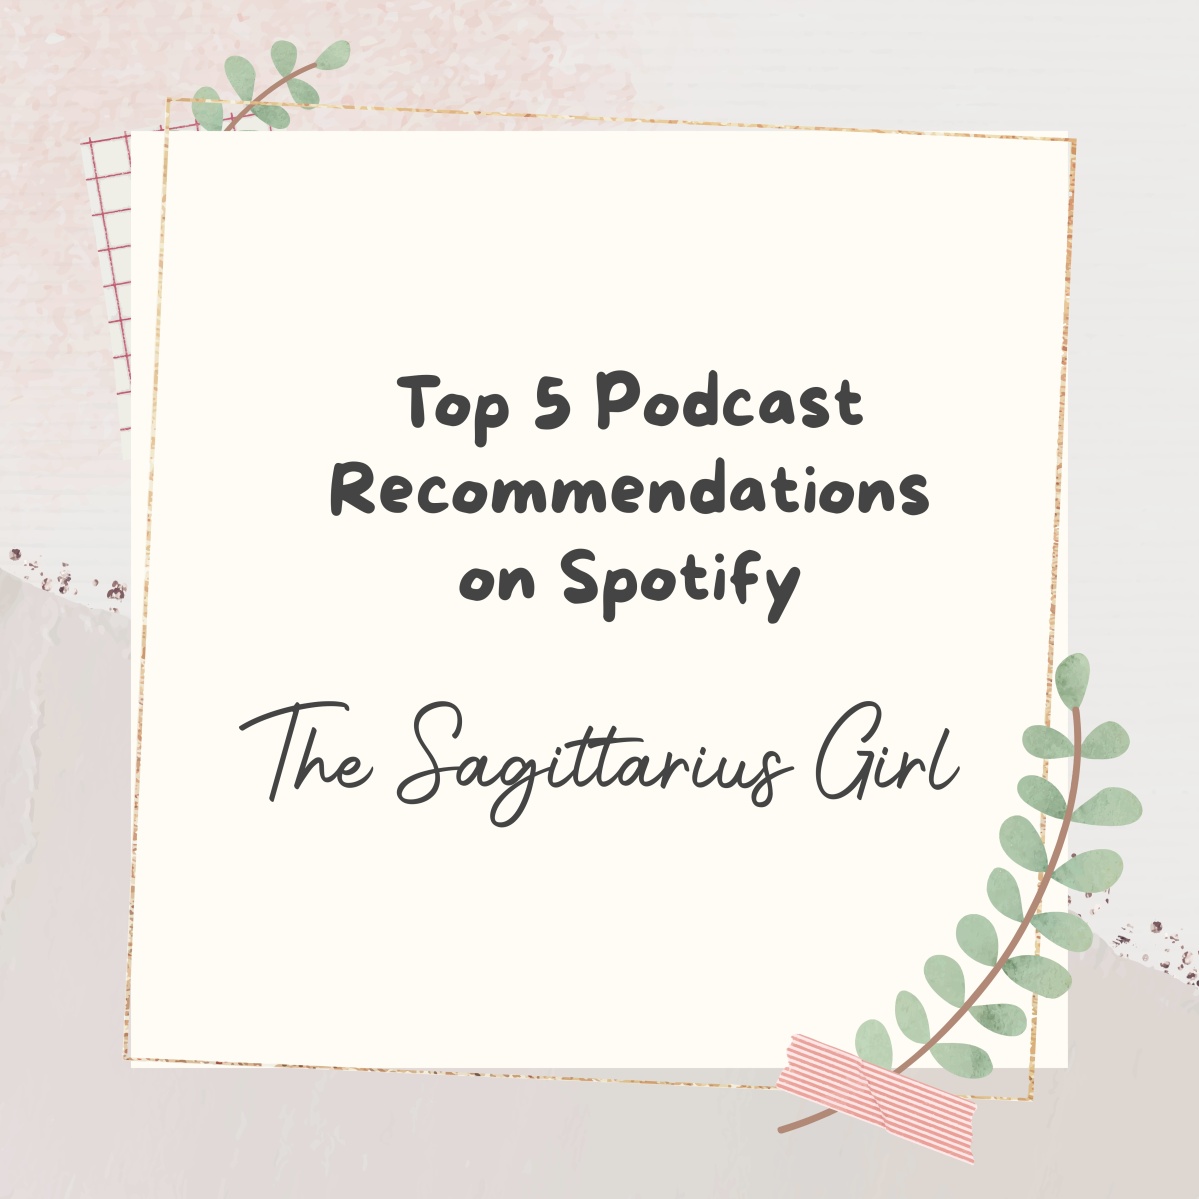 Top 5 Podcast Recommendations on Spotify